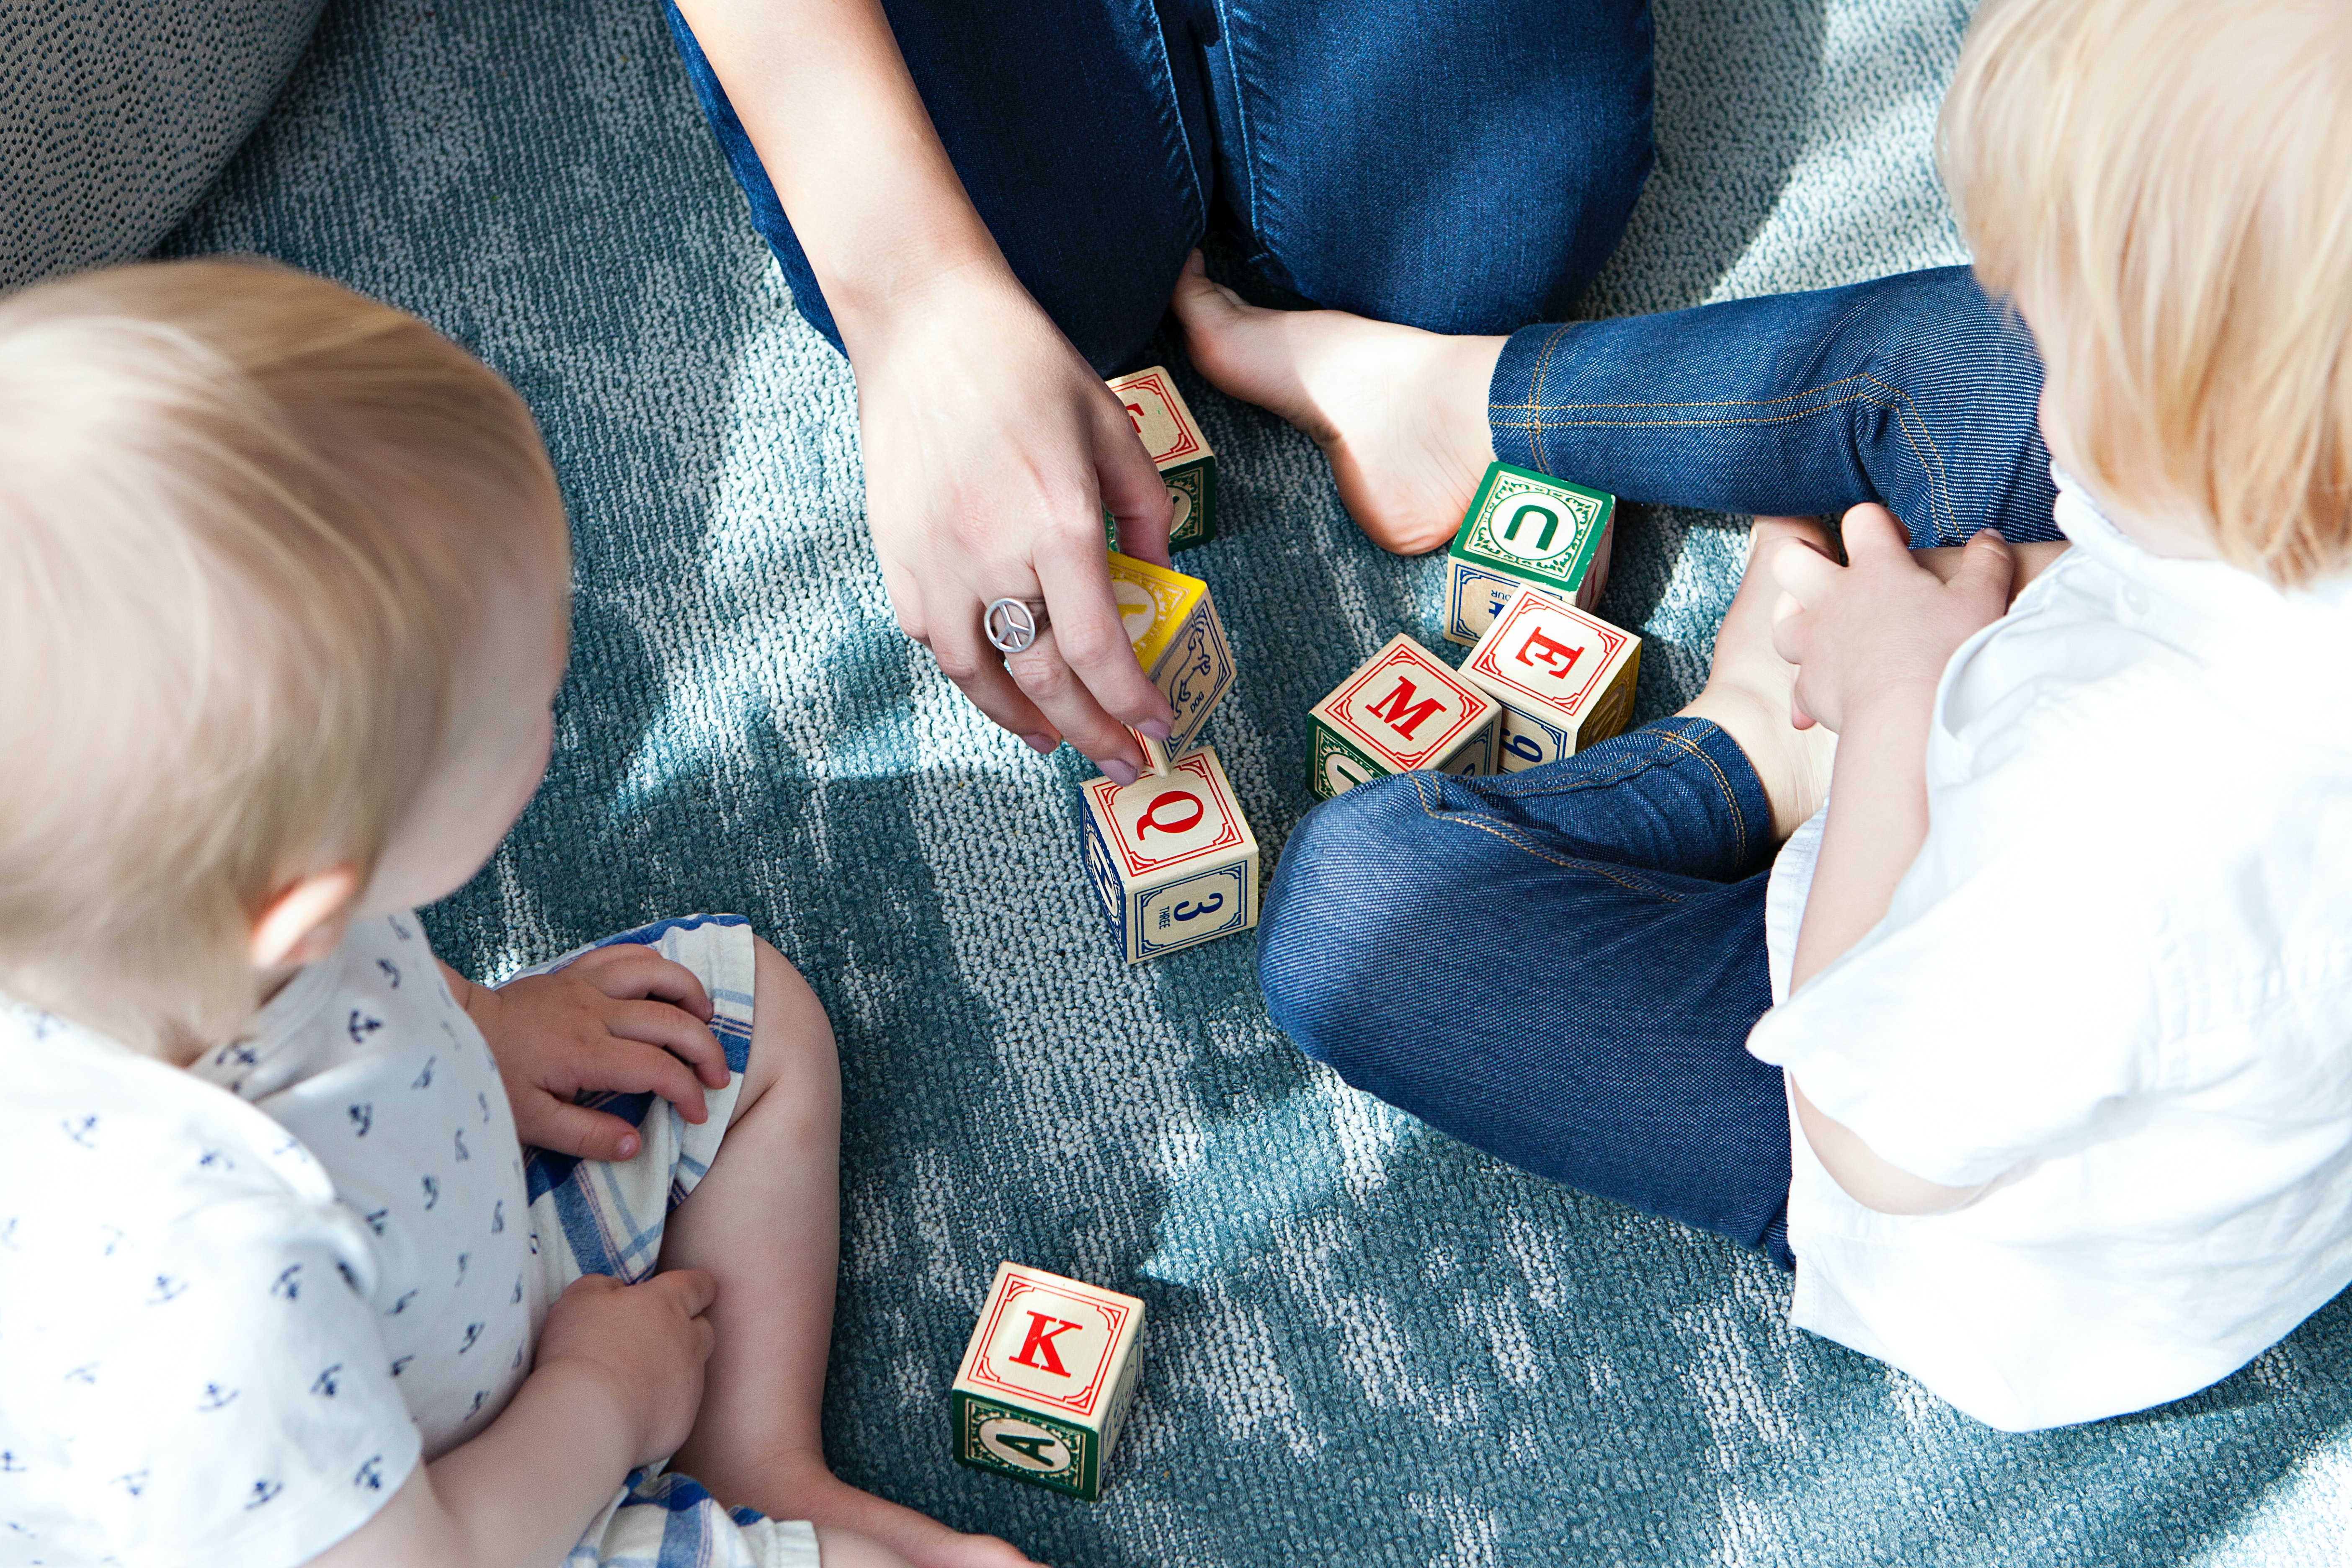 A nanny plays with blocks together with two children